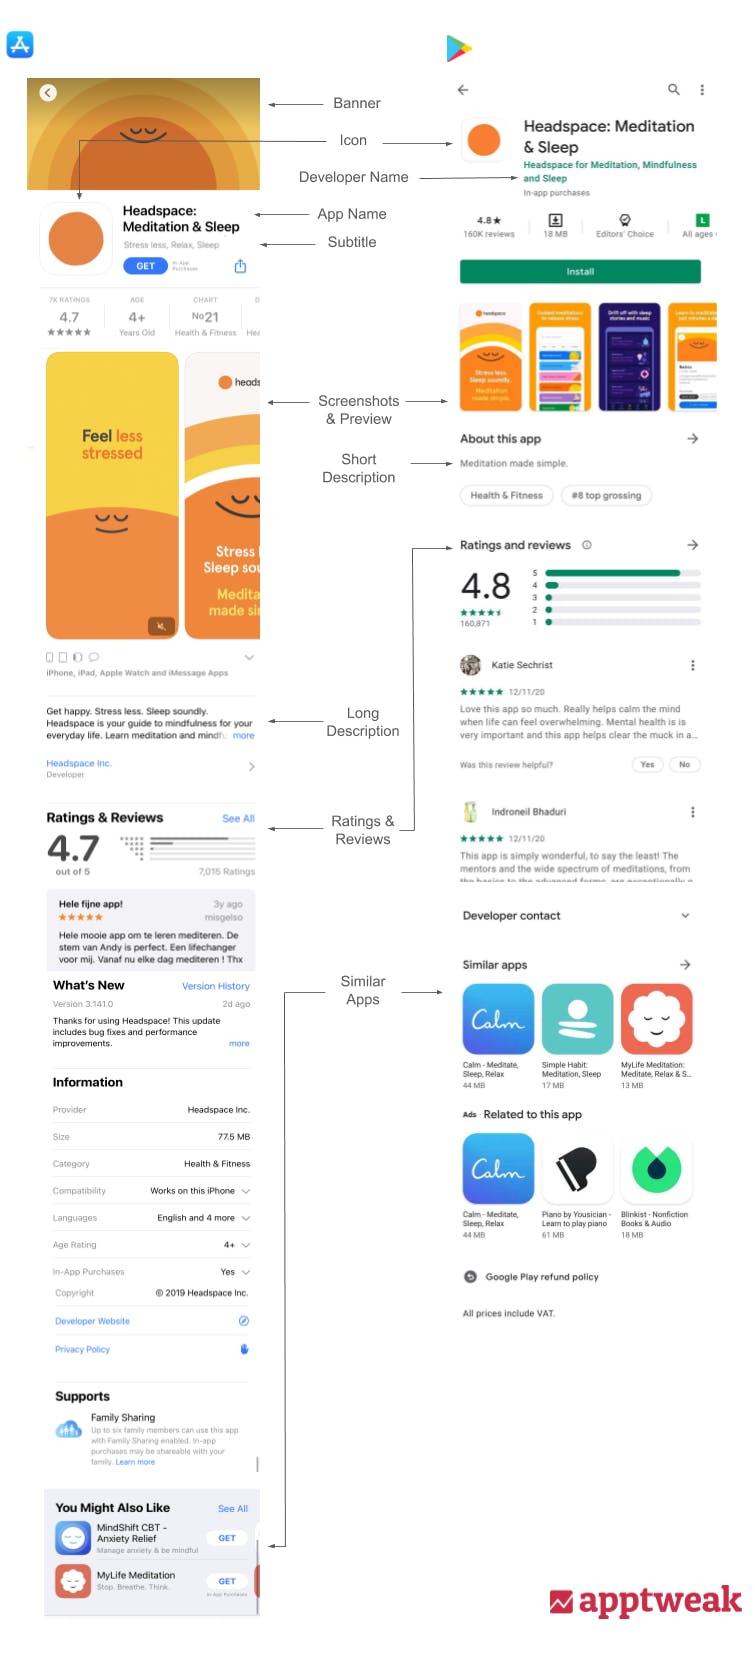 An overview of what the app product page of Headspace looks like in the App Store vs Google Play.